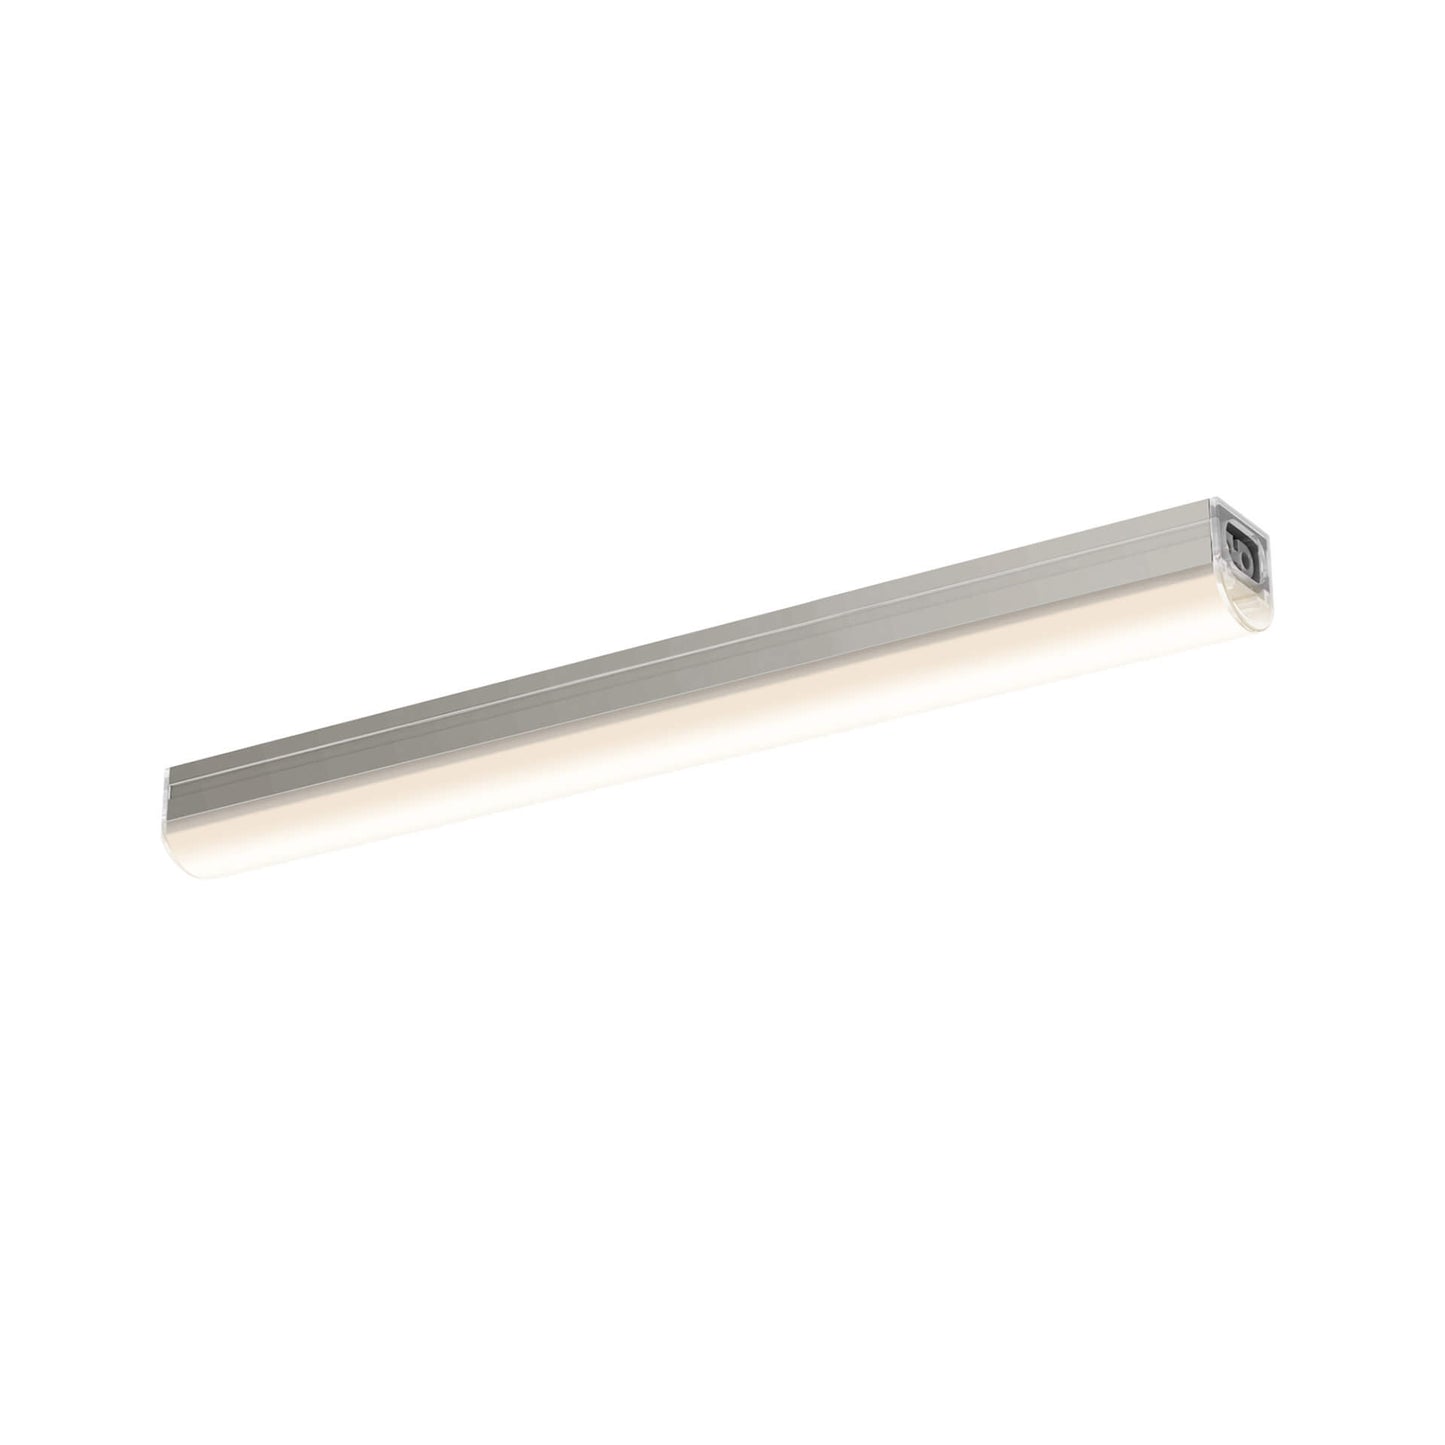 36 Inch PowerLED Linear Under Cabinet Light